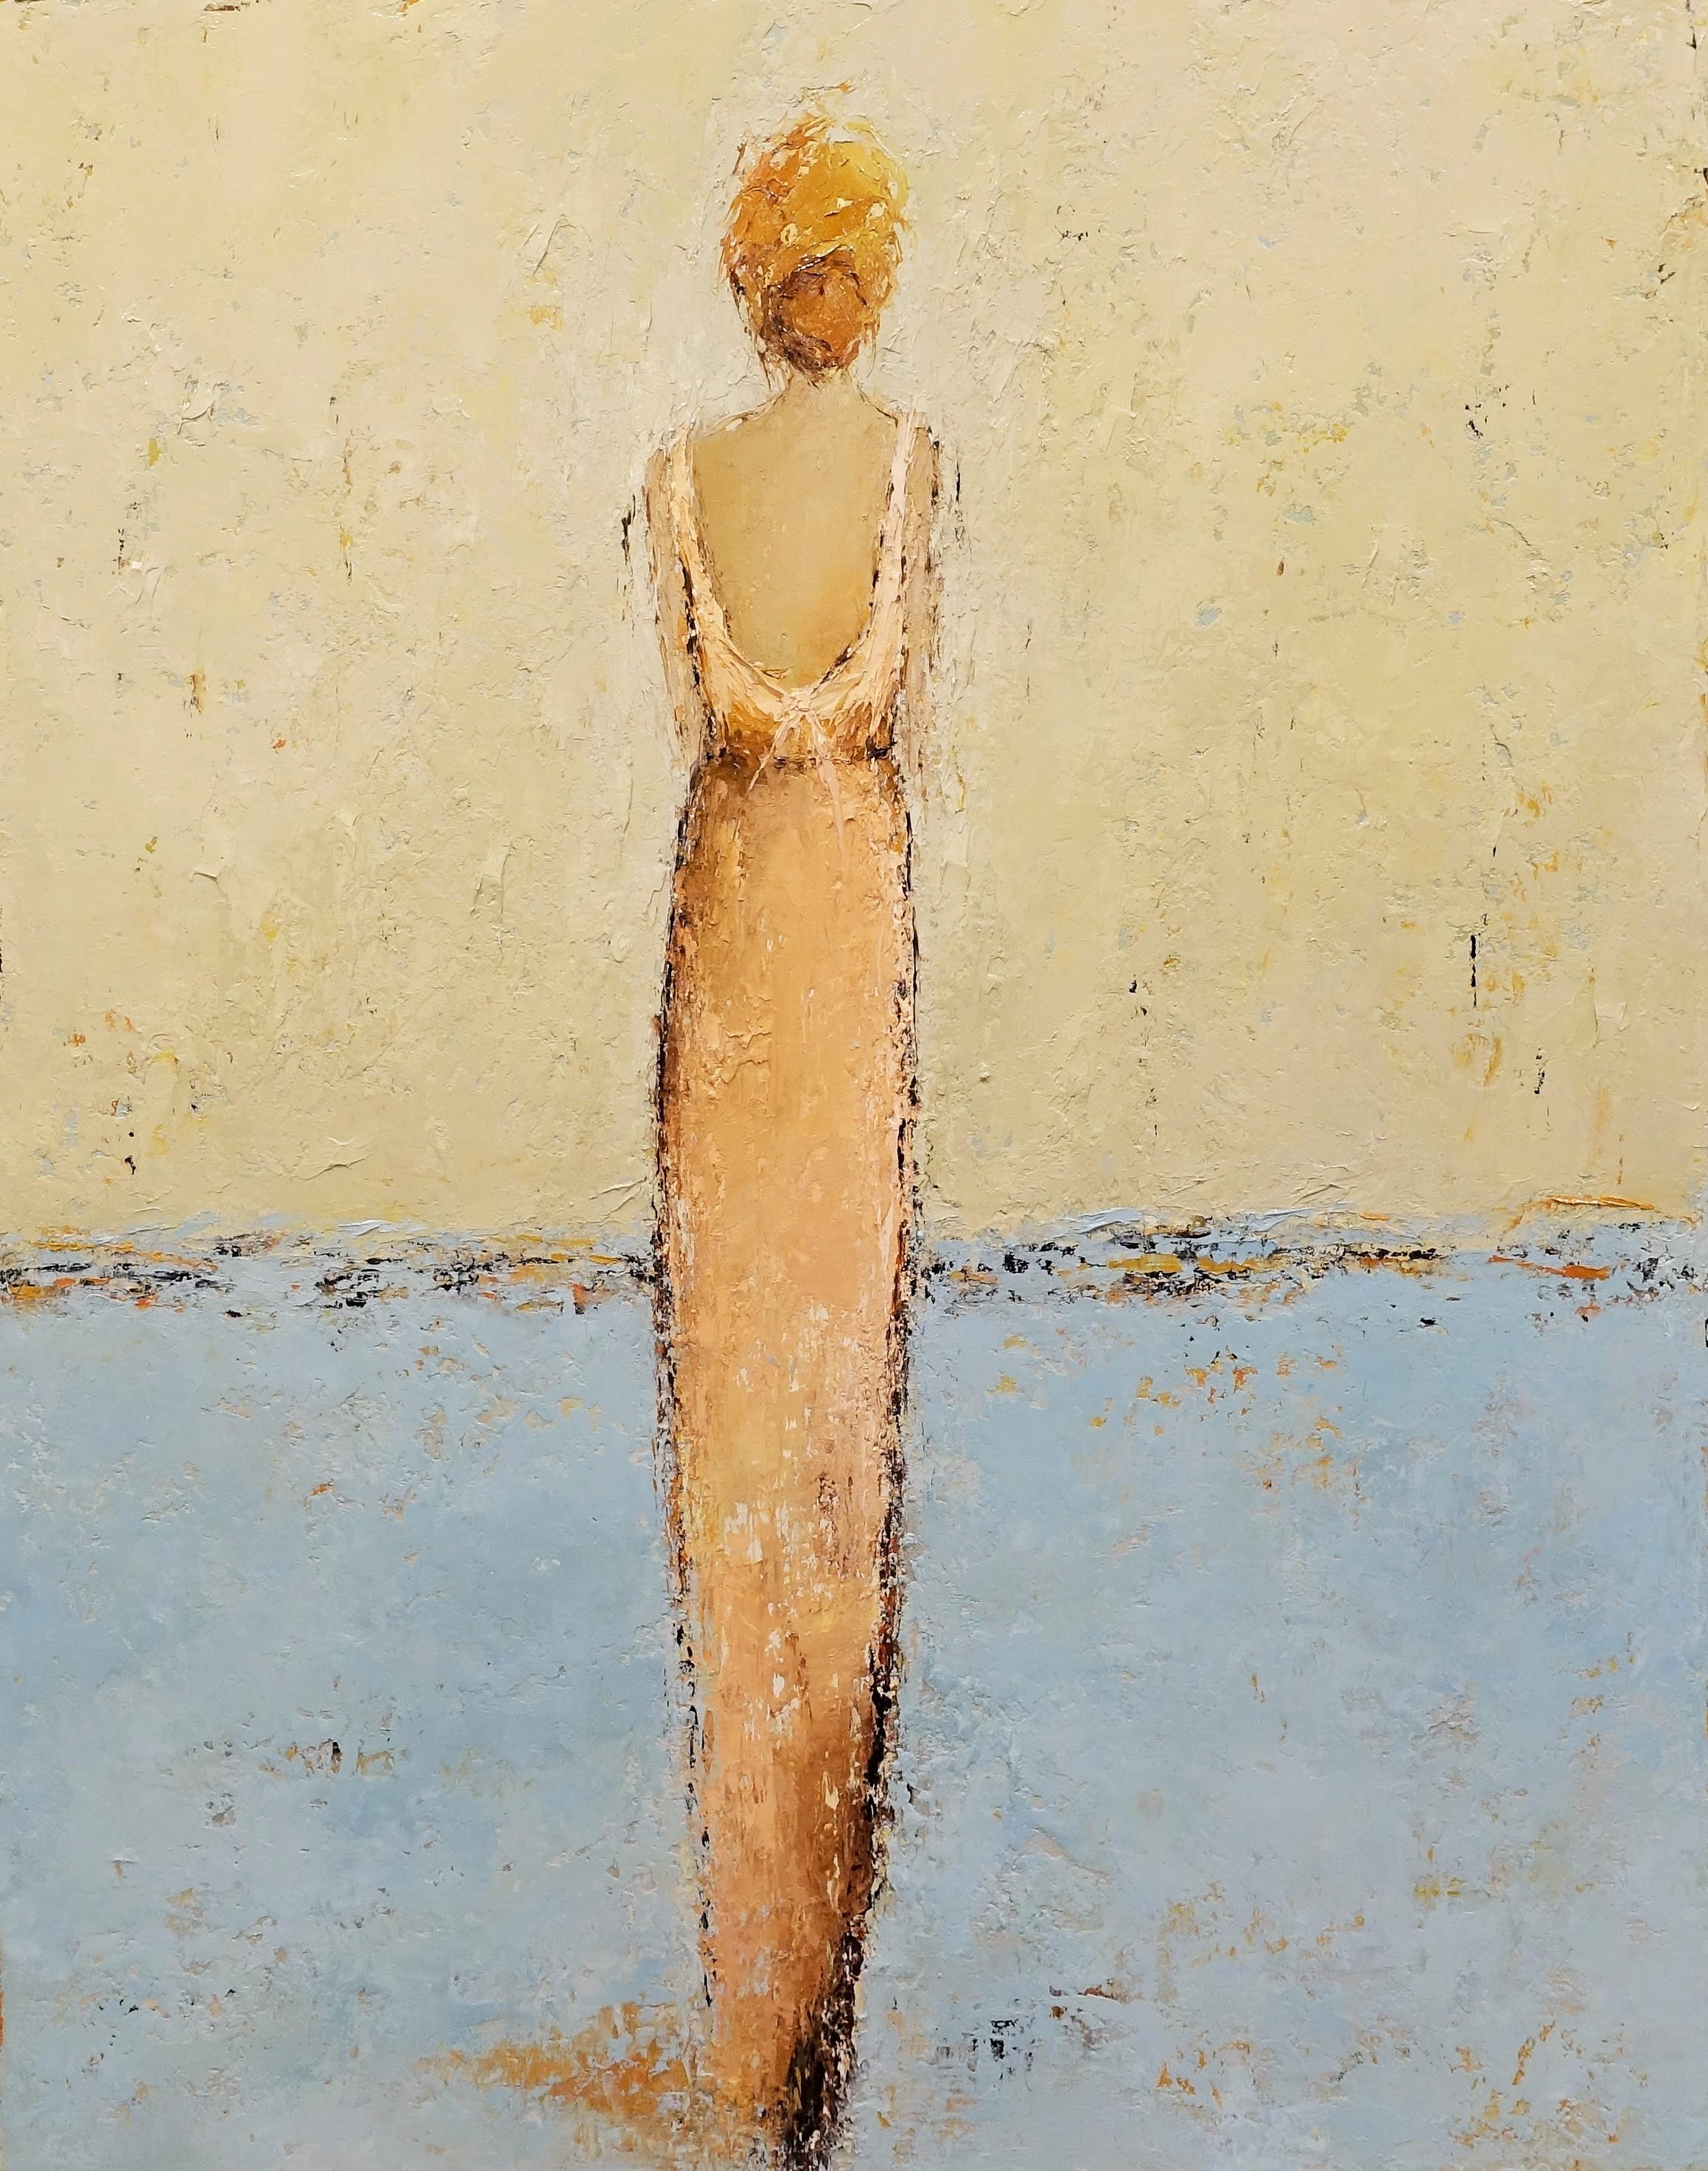 'Emma' is a medium size framed Impressionist oil on painting canvas created by American artist Geri Eubanks in 2018. Featuring a vertical format, the painting depicts a blond woman seen from the back, wearing a lovely pink and ocher gown revealing